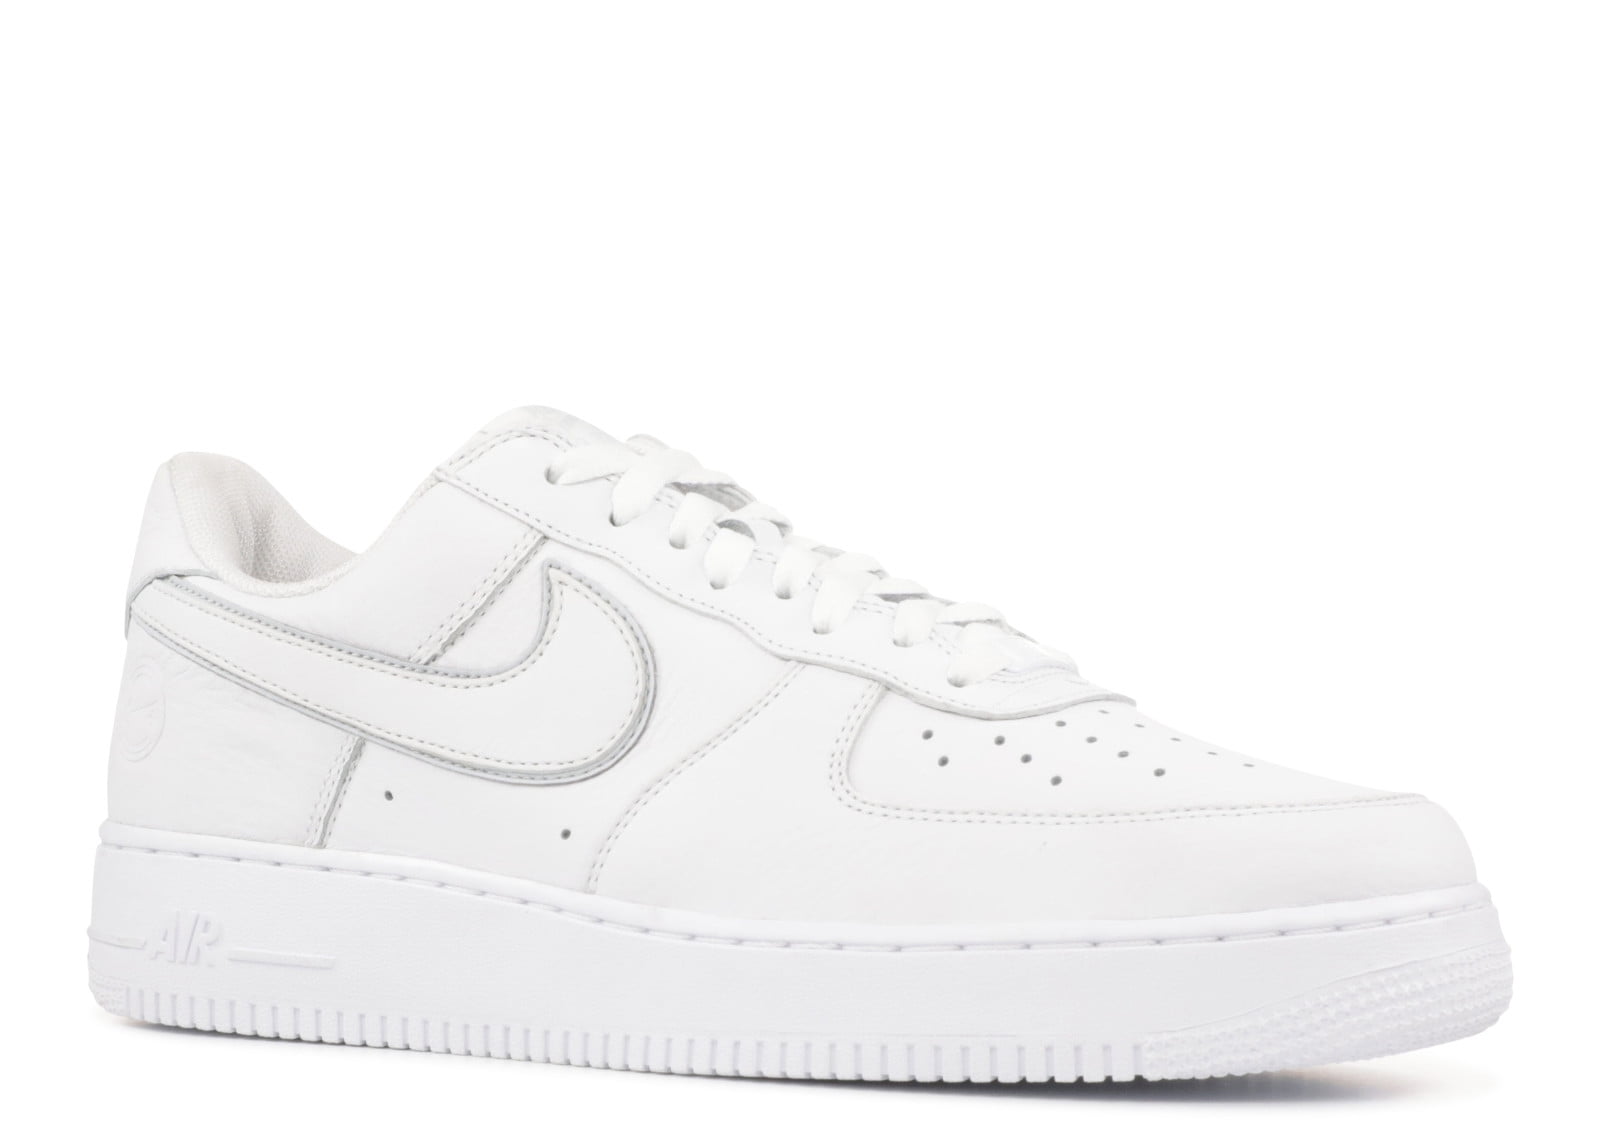 Nike - AIR FORCE 1 NIKE CONNECT QS NYC 